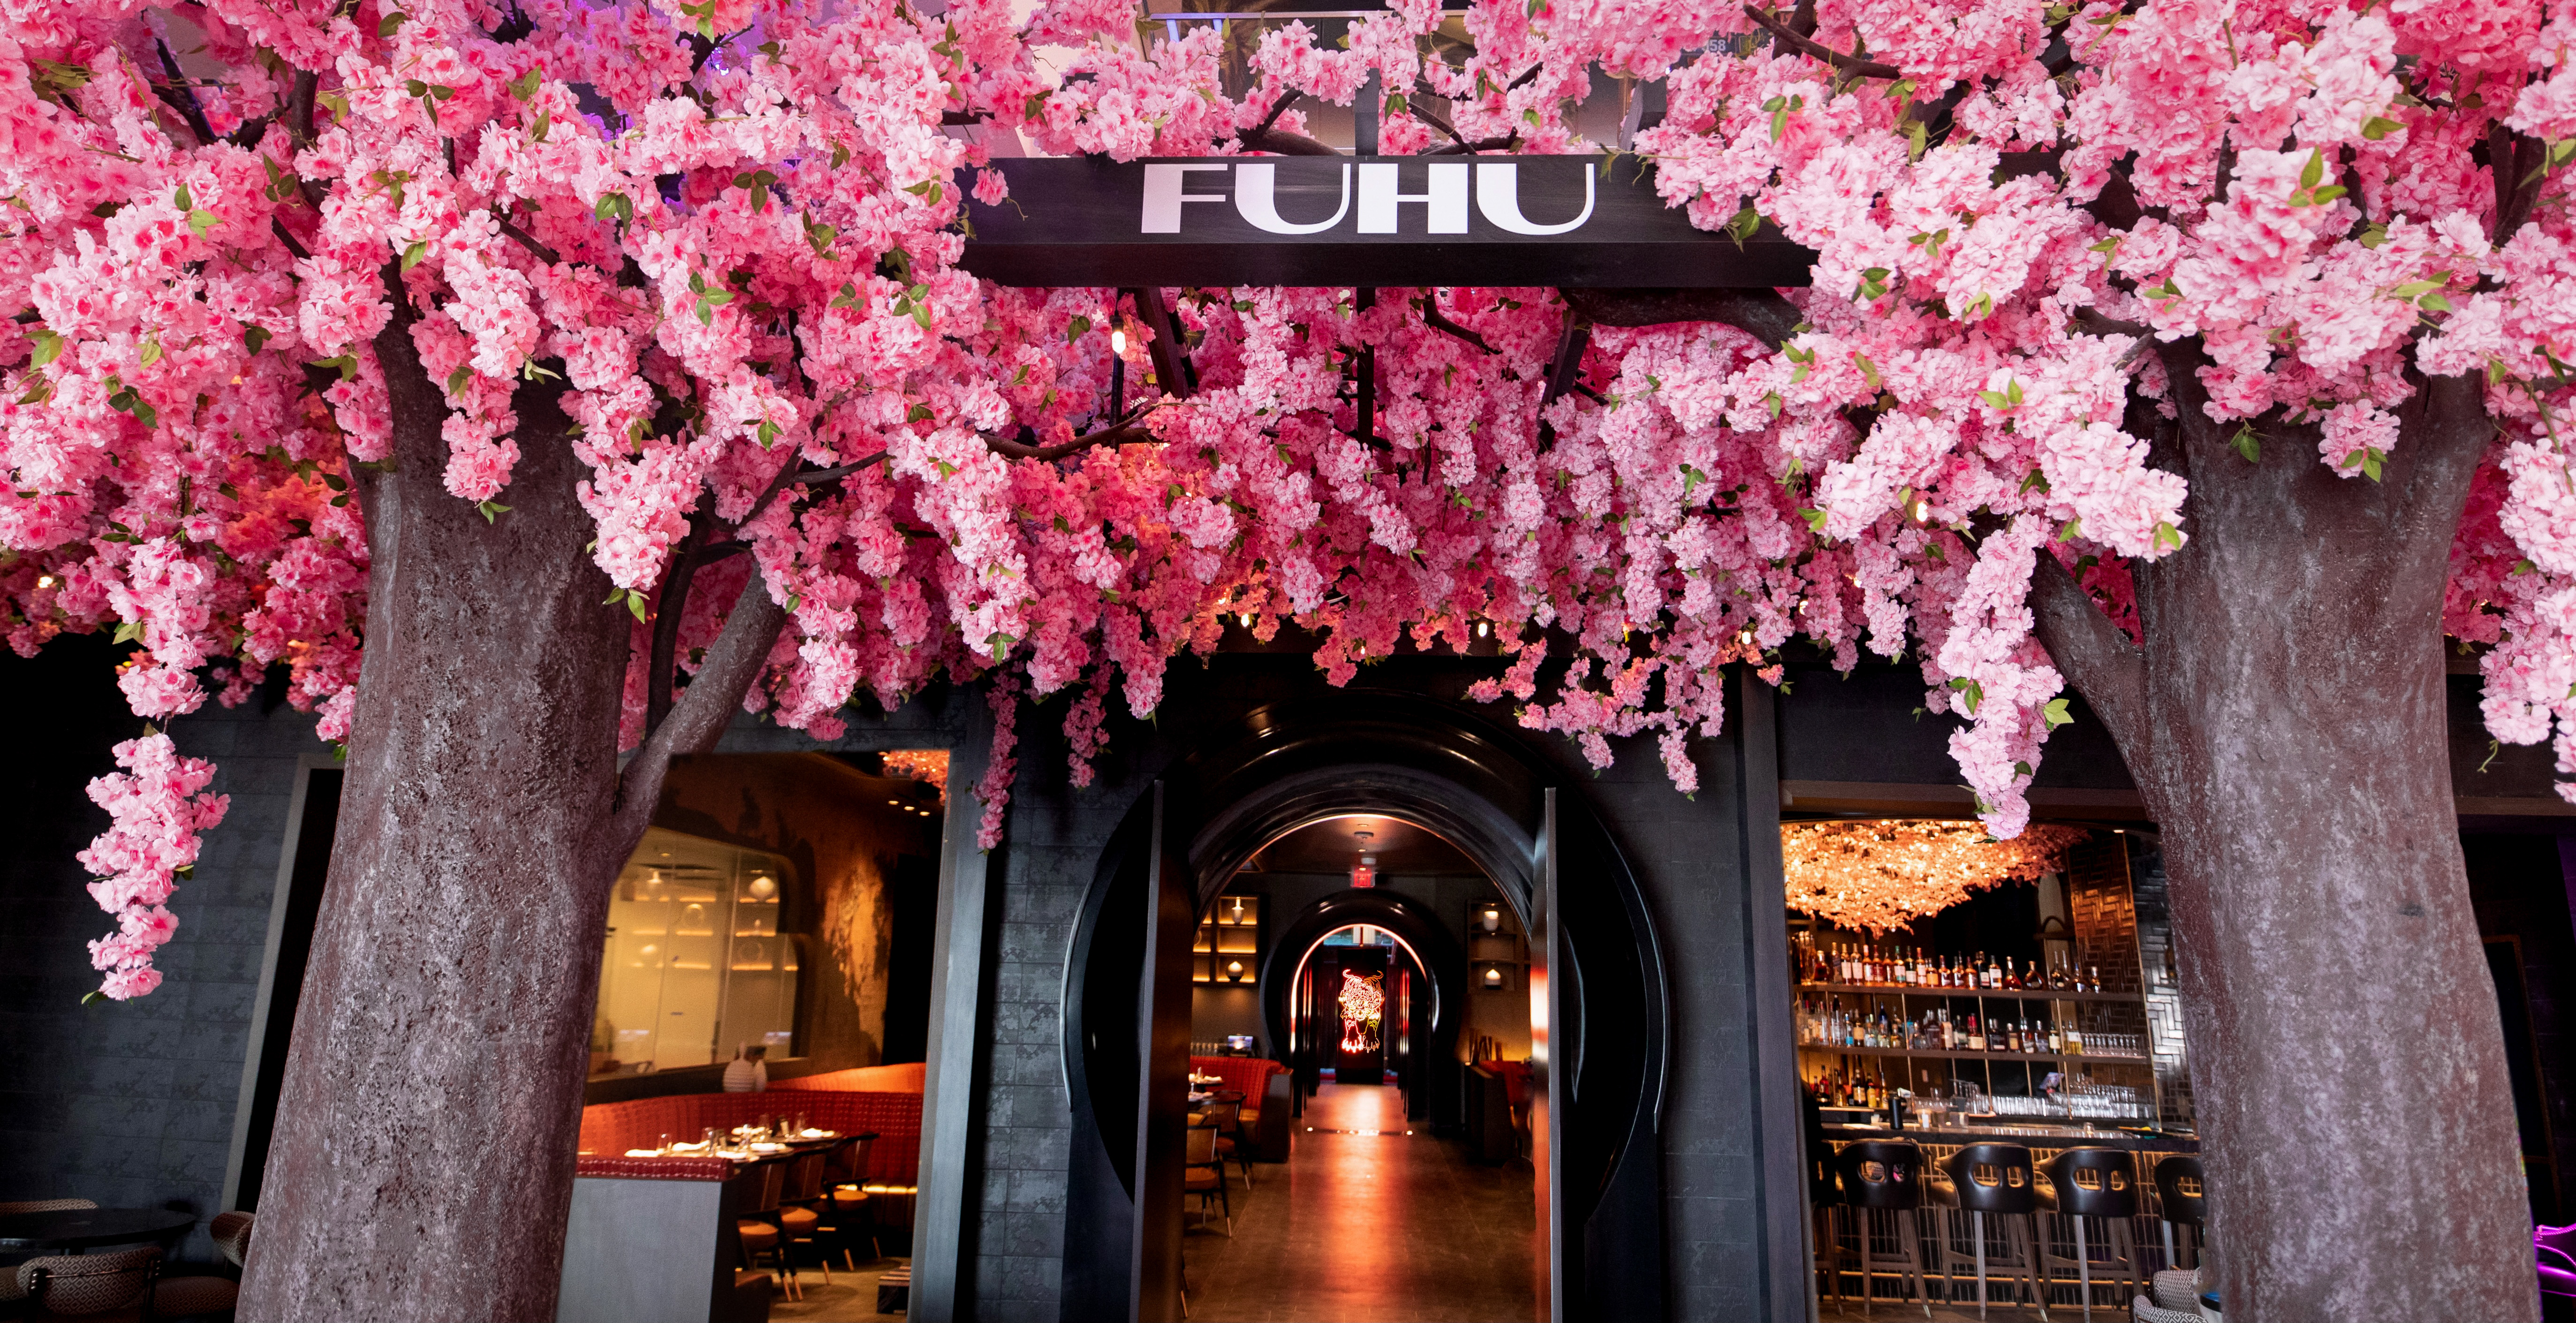 The exterior of a restaurant with pink flowers